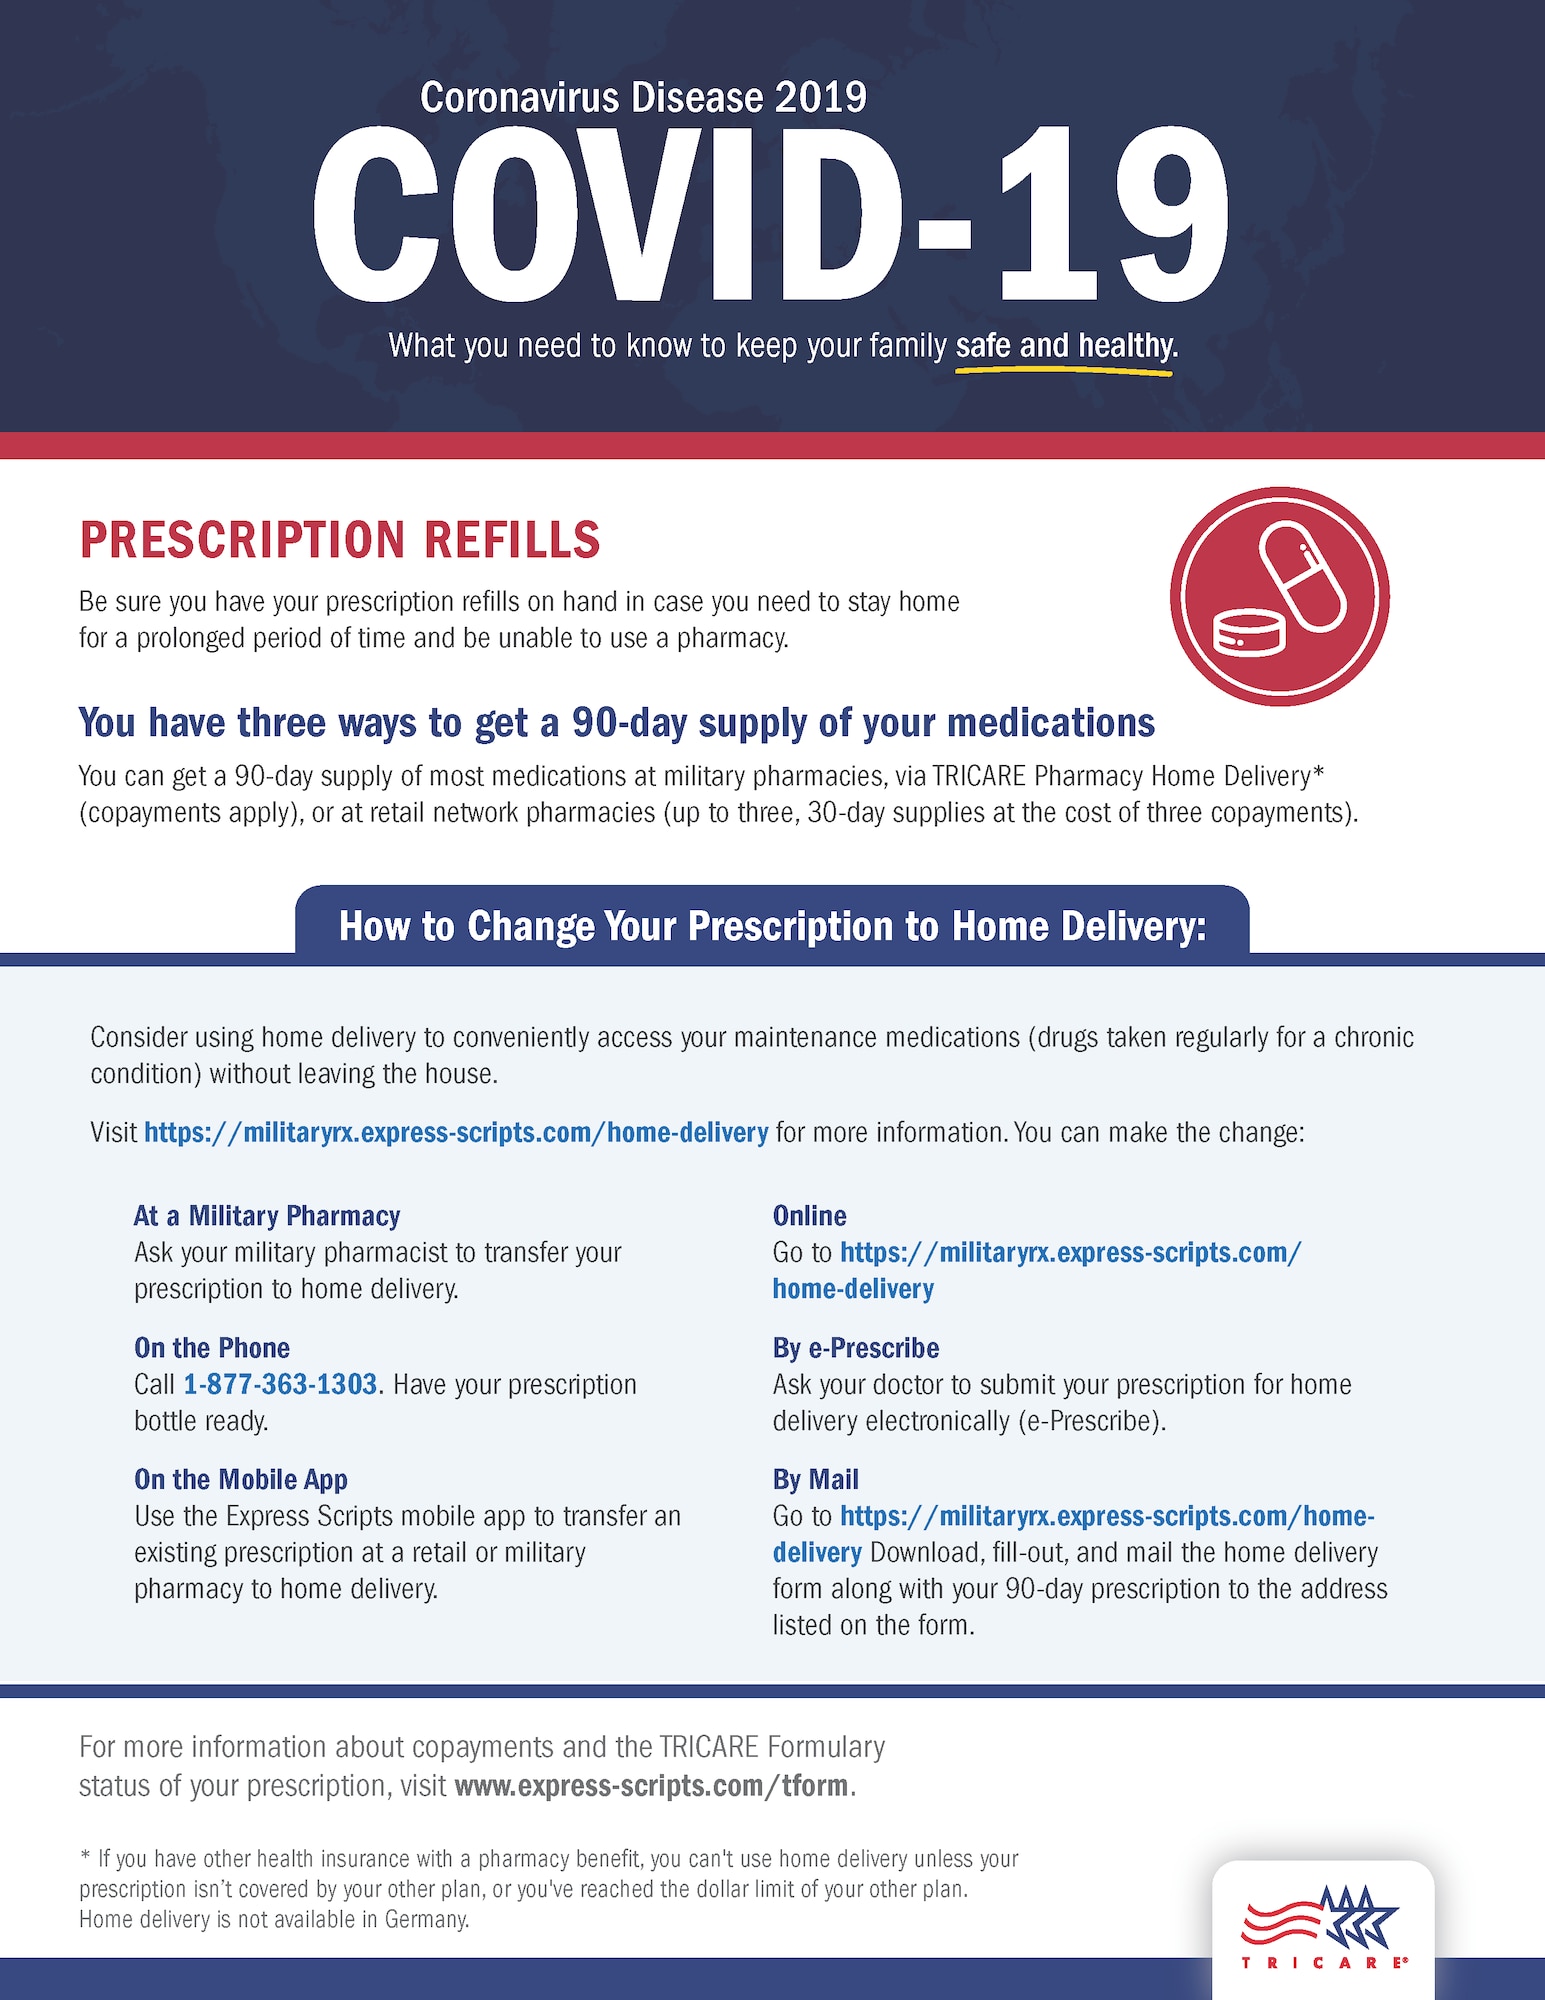 A graphic showing people how to get pharmacy prescriptions mailed to their homes due to COVID-19.